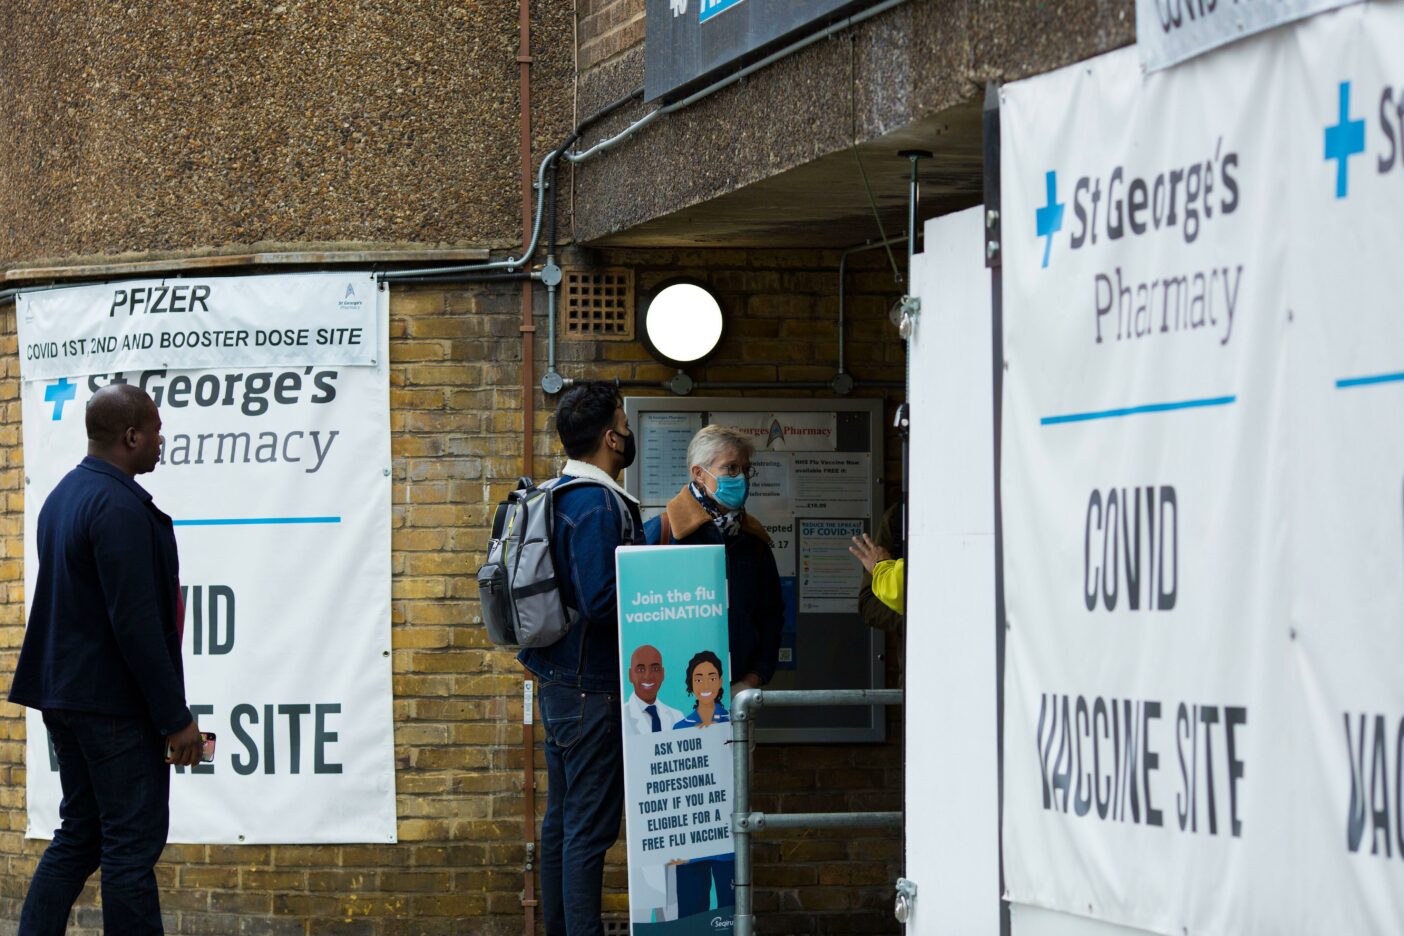 anners of a Covid vaccine site are seen displayed outside a pharmacy in London.